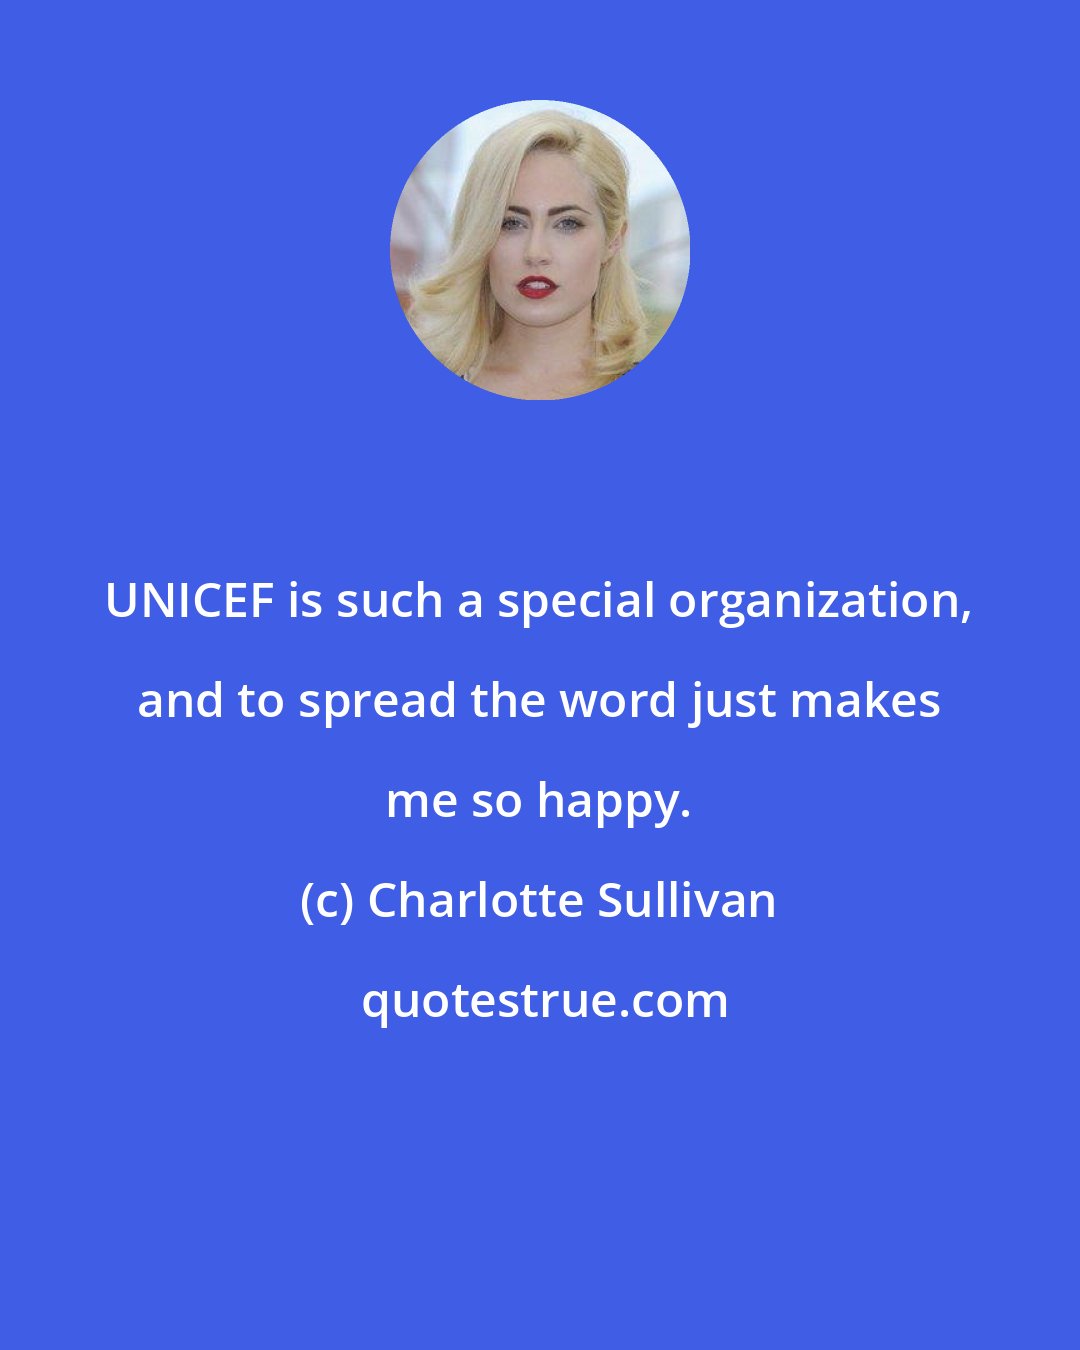 Charlotte Sullivan: UNICEF is such a special organization, and to spread the word just makes me so happy.